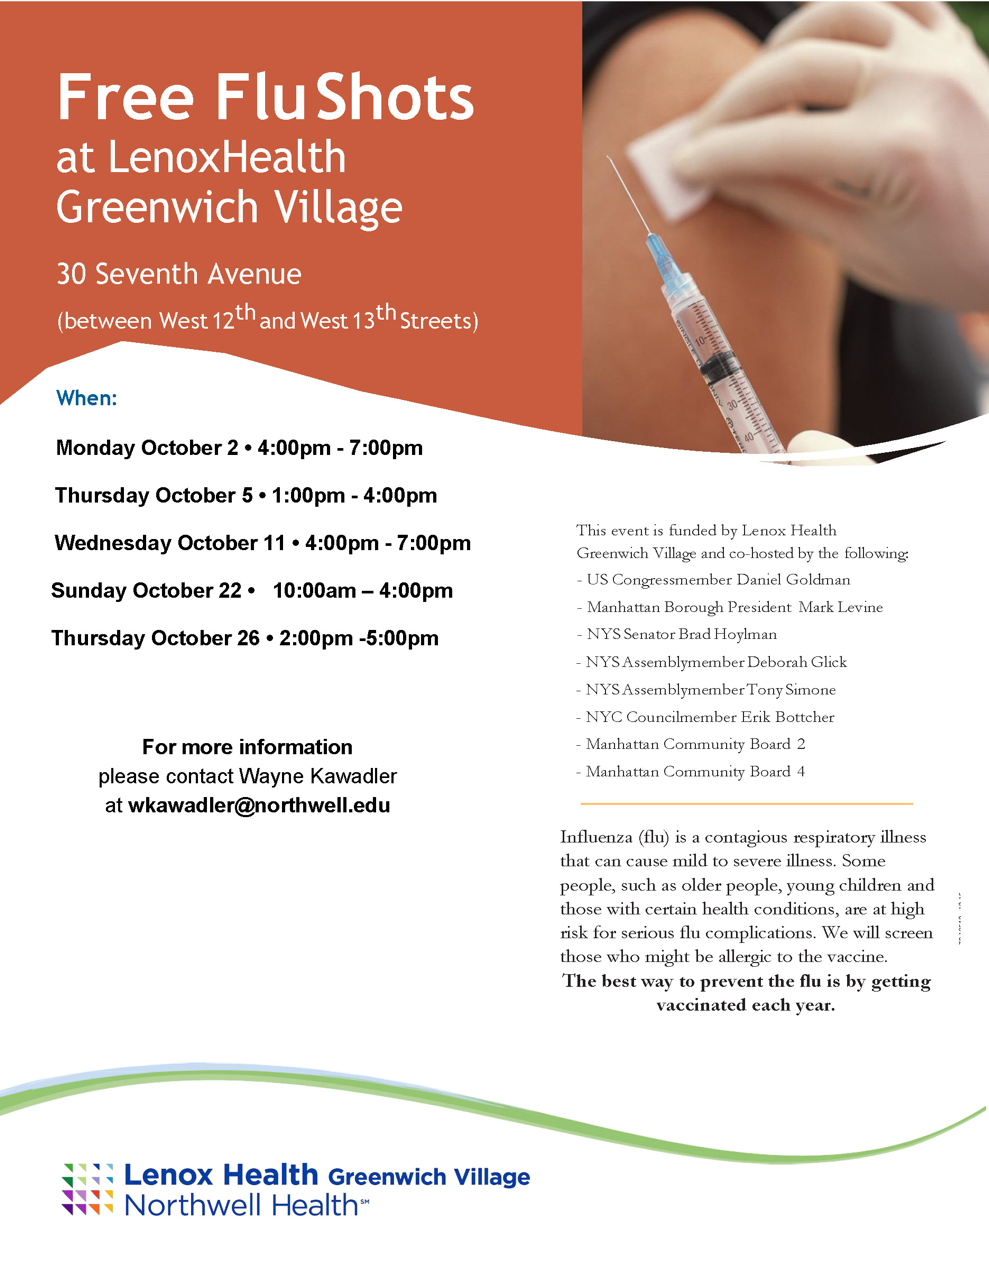 The image displays a Greenwich Village flyer advertising free flu shots at &quot;LenoxHealth,&quot; 30 Seventh Avenue, with prominent co-hosts. Contact Wayne Kawadler at &quot;wkawadler@northwell.edu&quot; for details. The flyer emphasizes the importance of annual flu vaccination and features logos for Lenox Health Greenwich Village and Northwell Health.